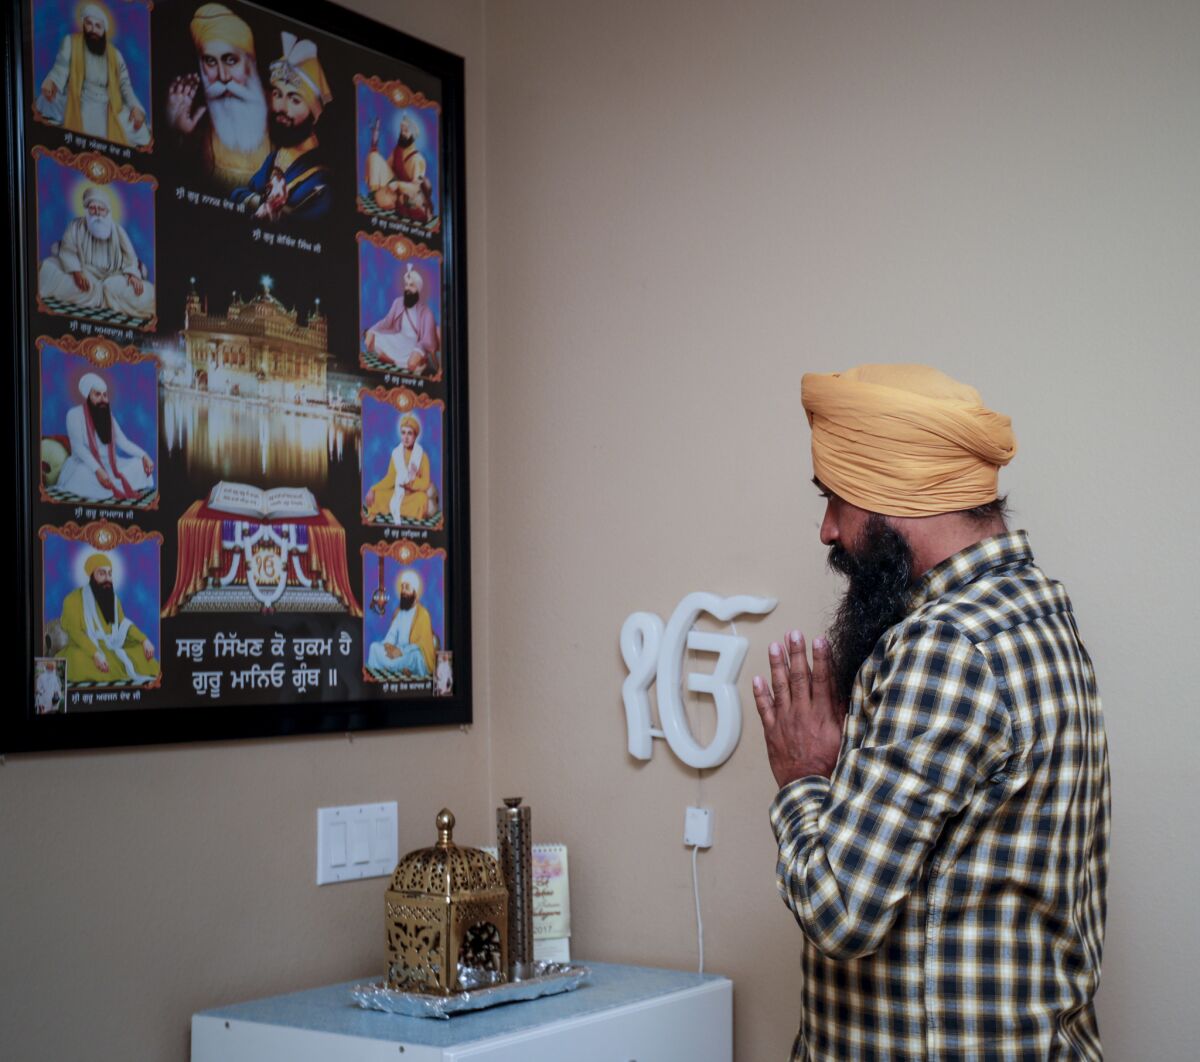 Singh prays at home before taking off for a long drive.